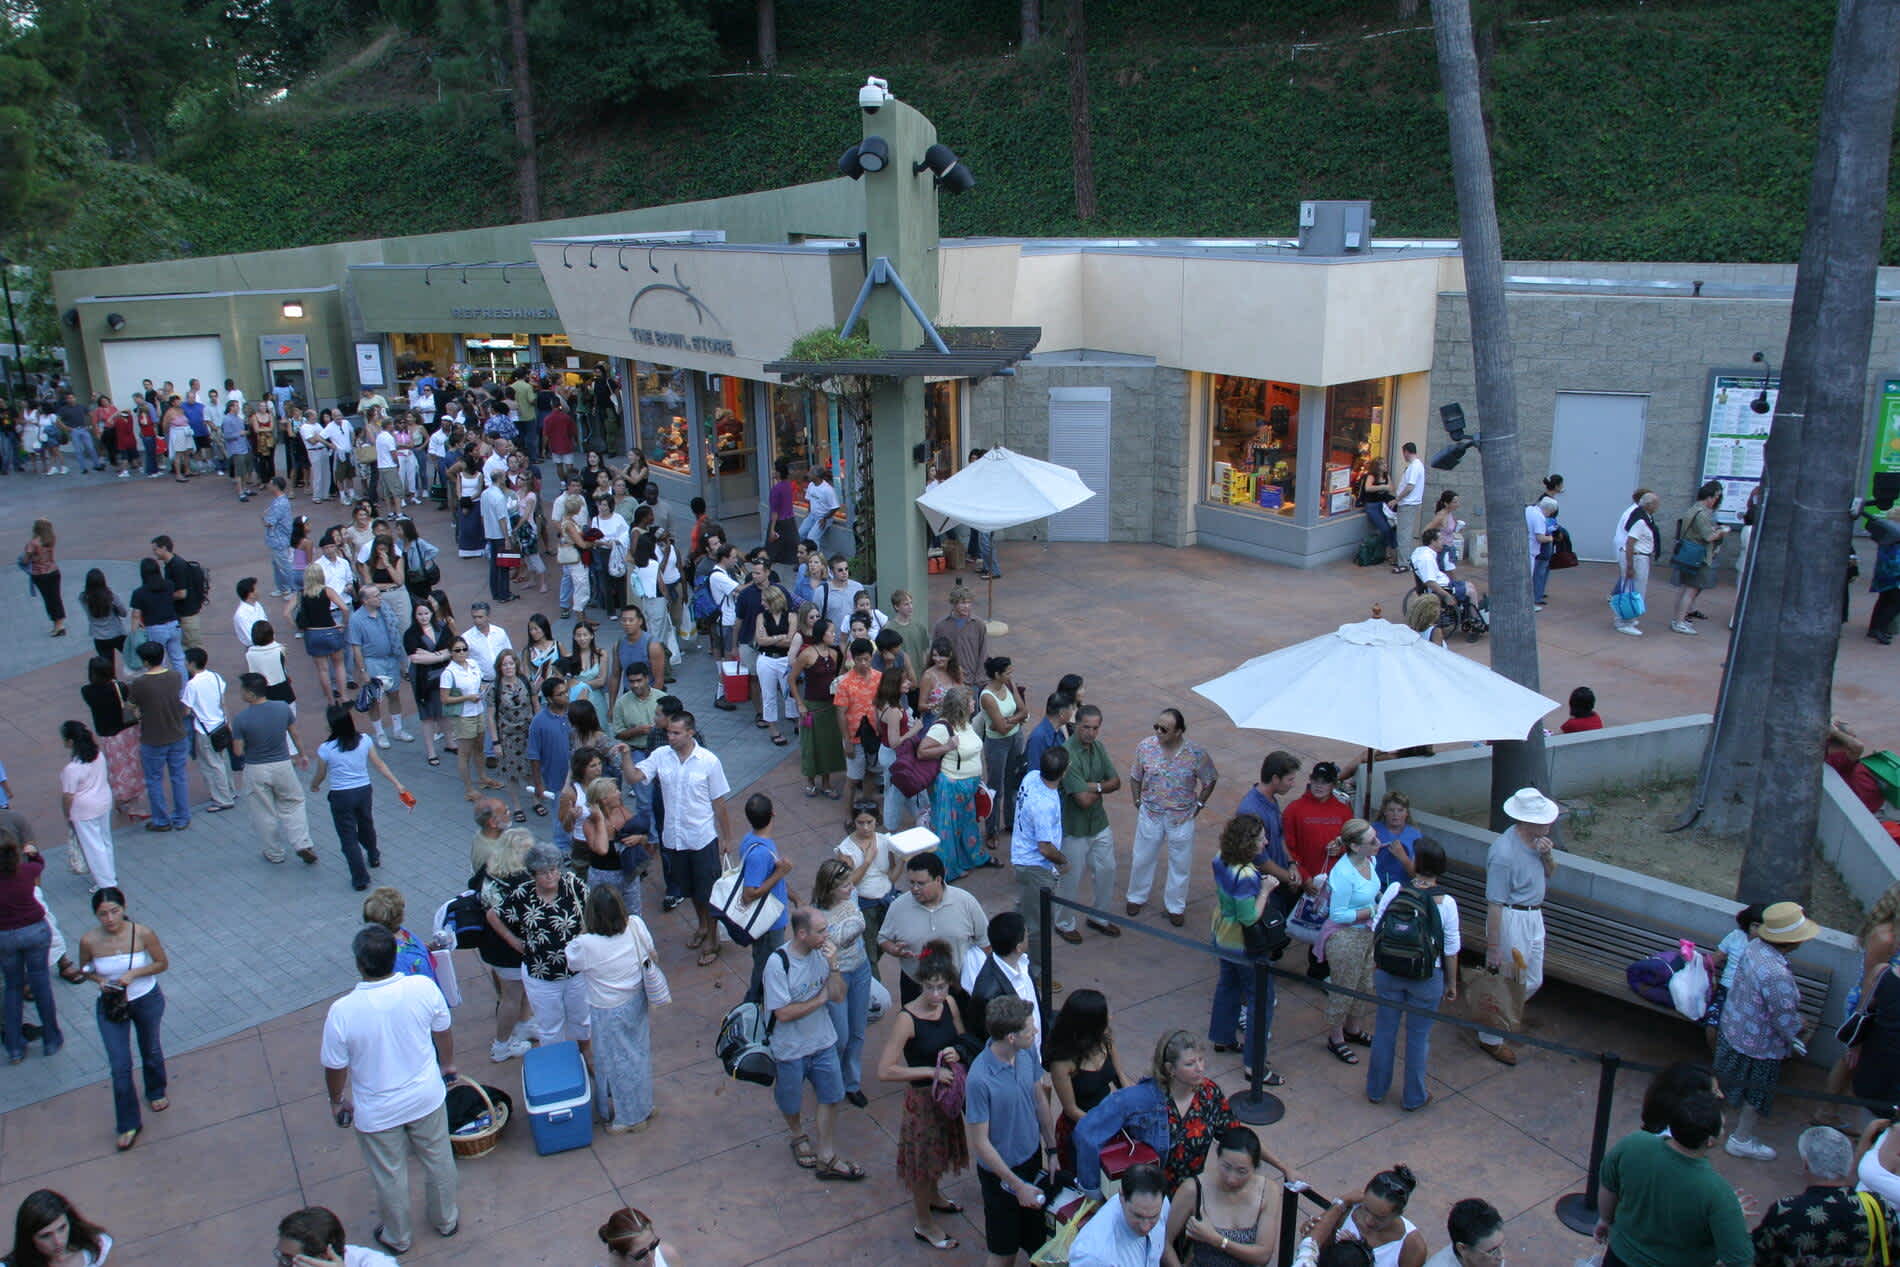 Concert goers line up on the Hollywood Bowl Plaza on Peppertree Lane, 2003.